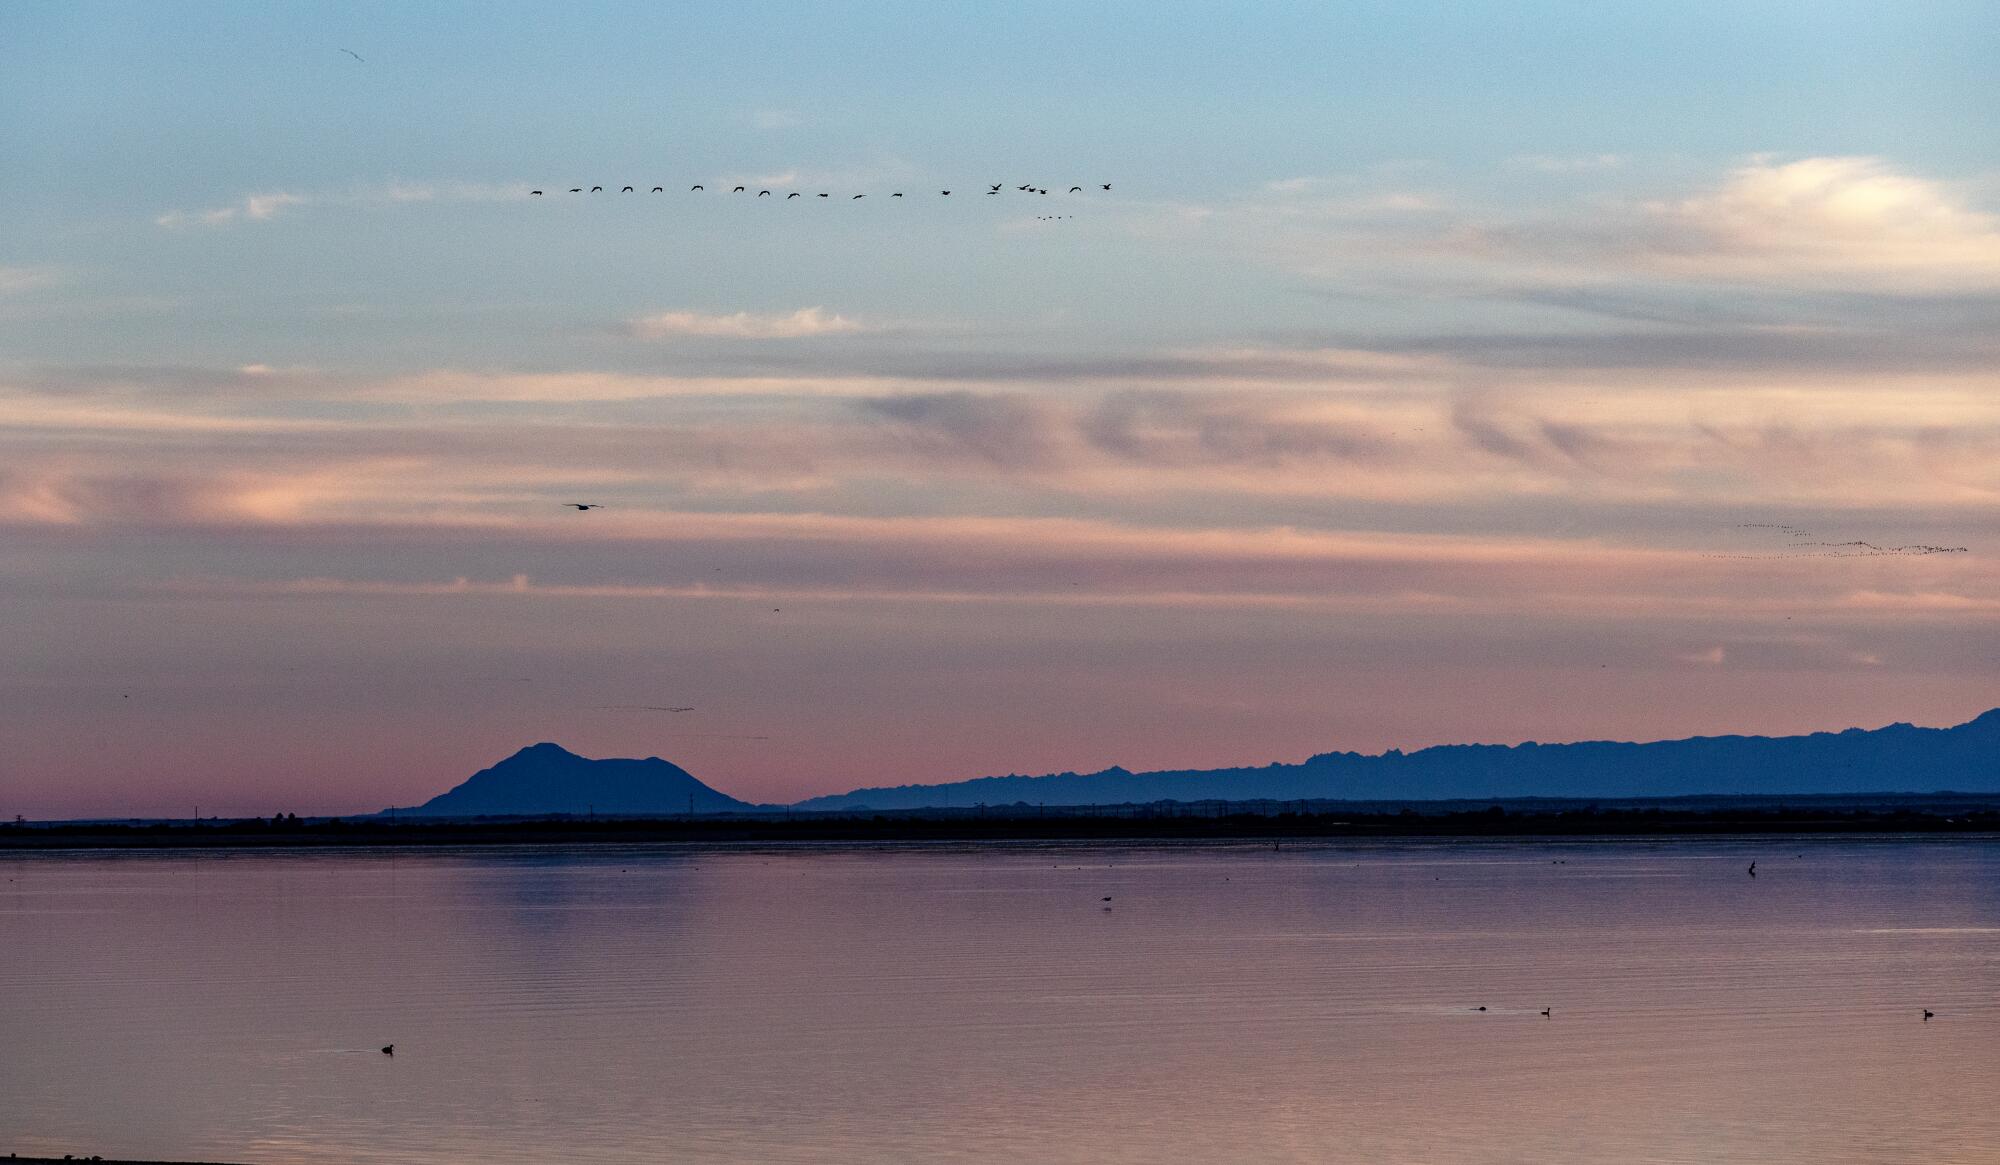 Dusk settles over a lake as birds fly in formation over it